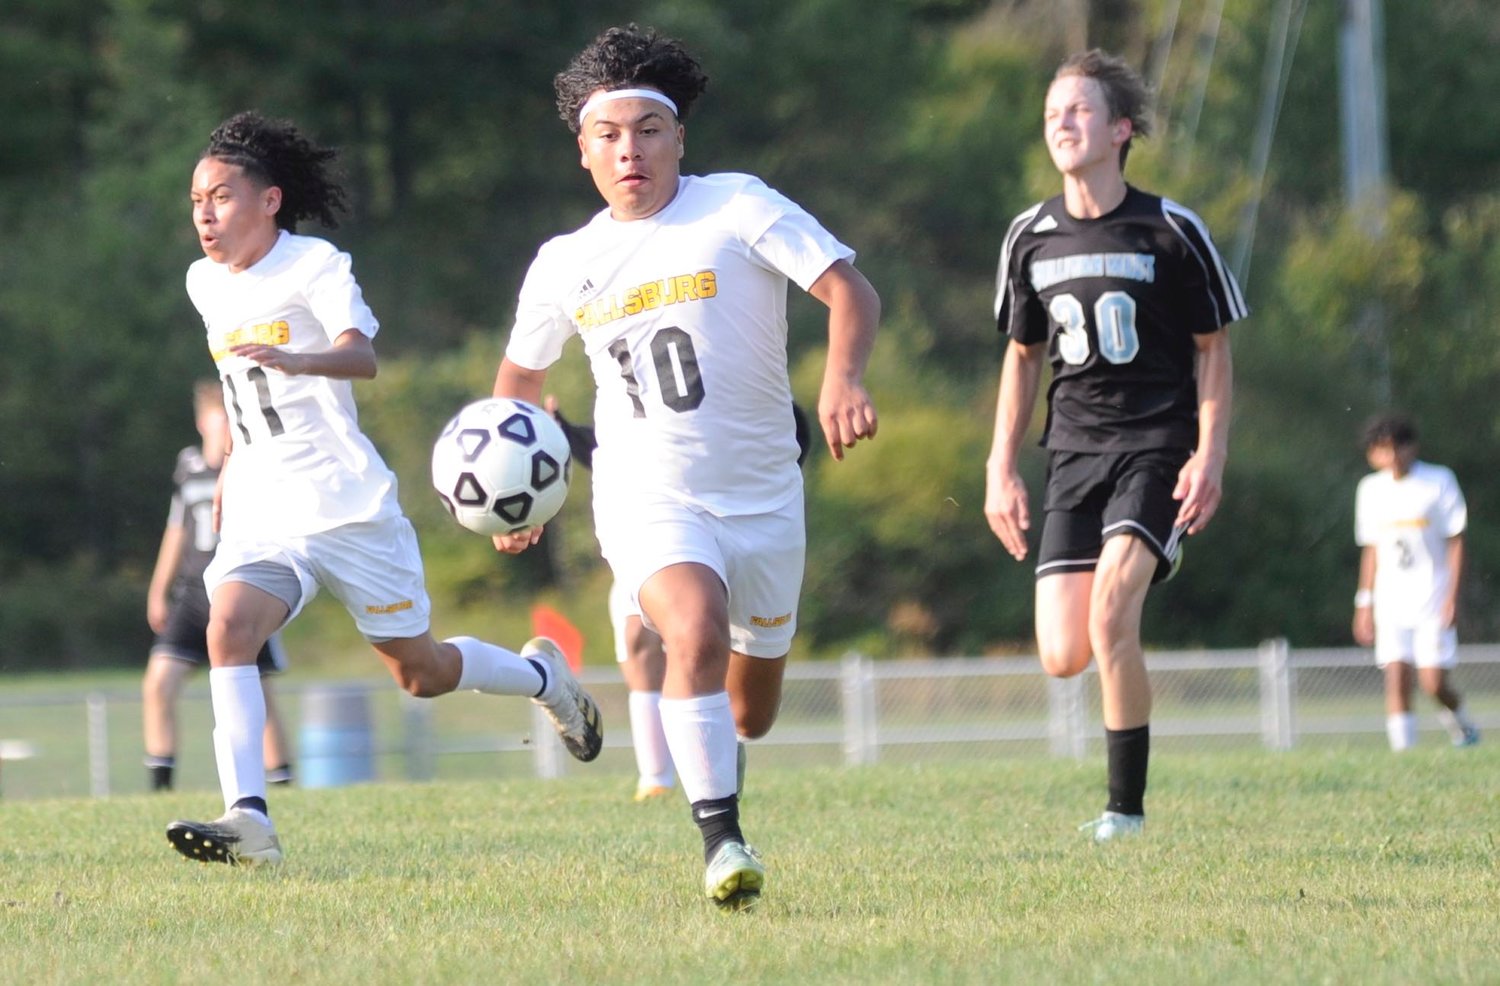 Headed for a “hat trick.” Fallsburg’s Diego Bonilla scored three goals during the match, thus posting a hat trick in the 7-0 win over the home team. He is flanked by teammate Jose Perez and Sullivan West’s Brodey Herbert.